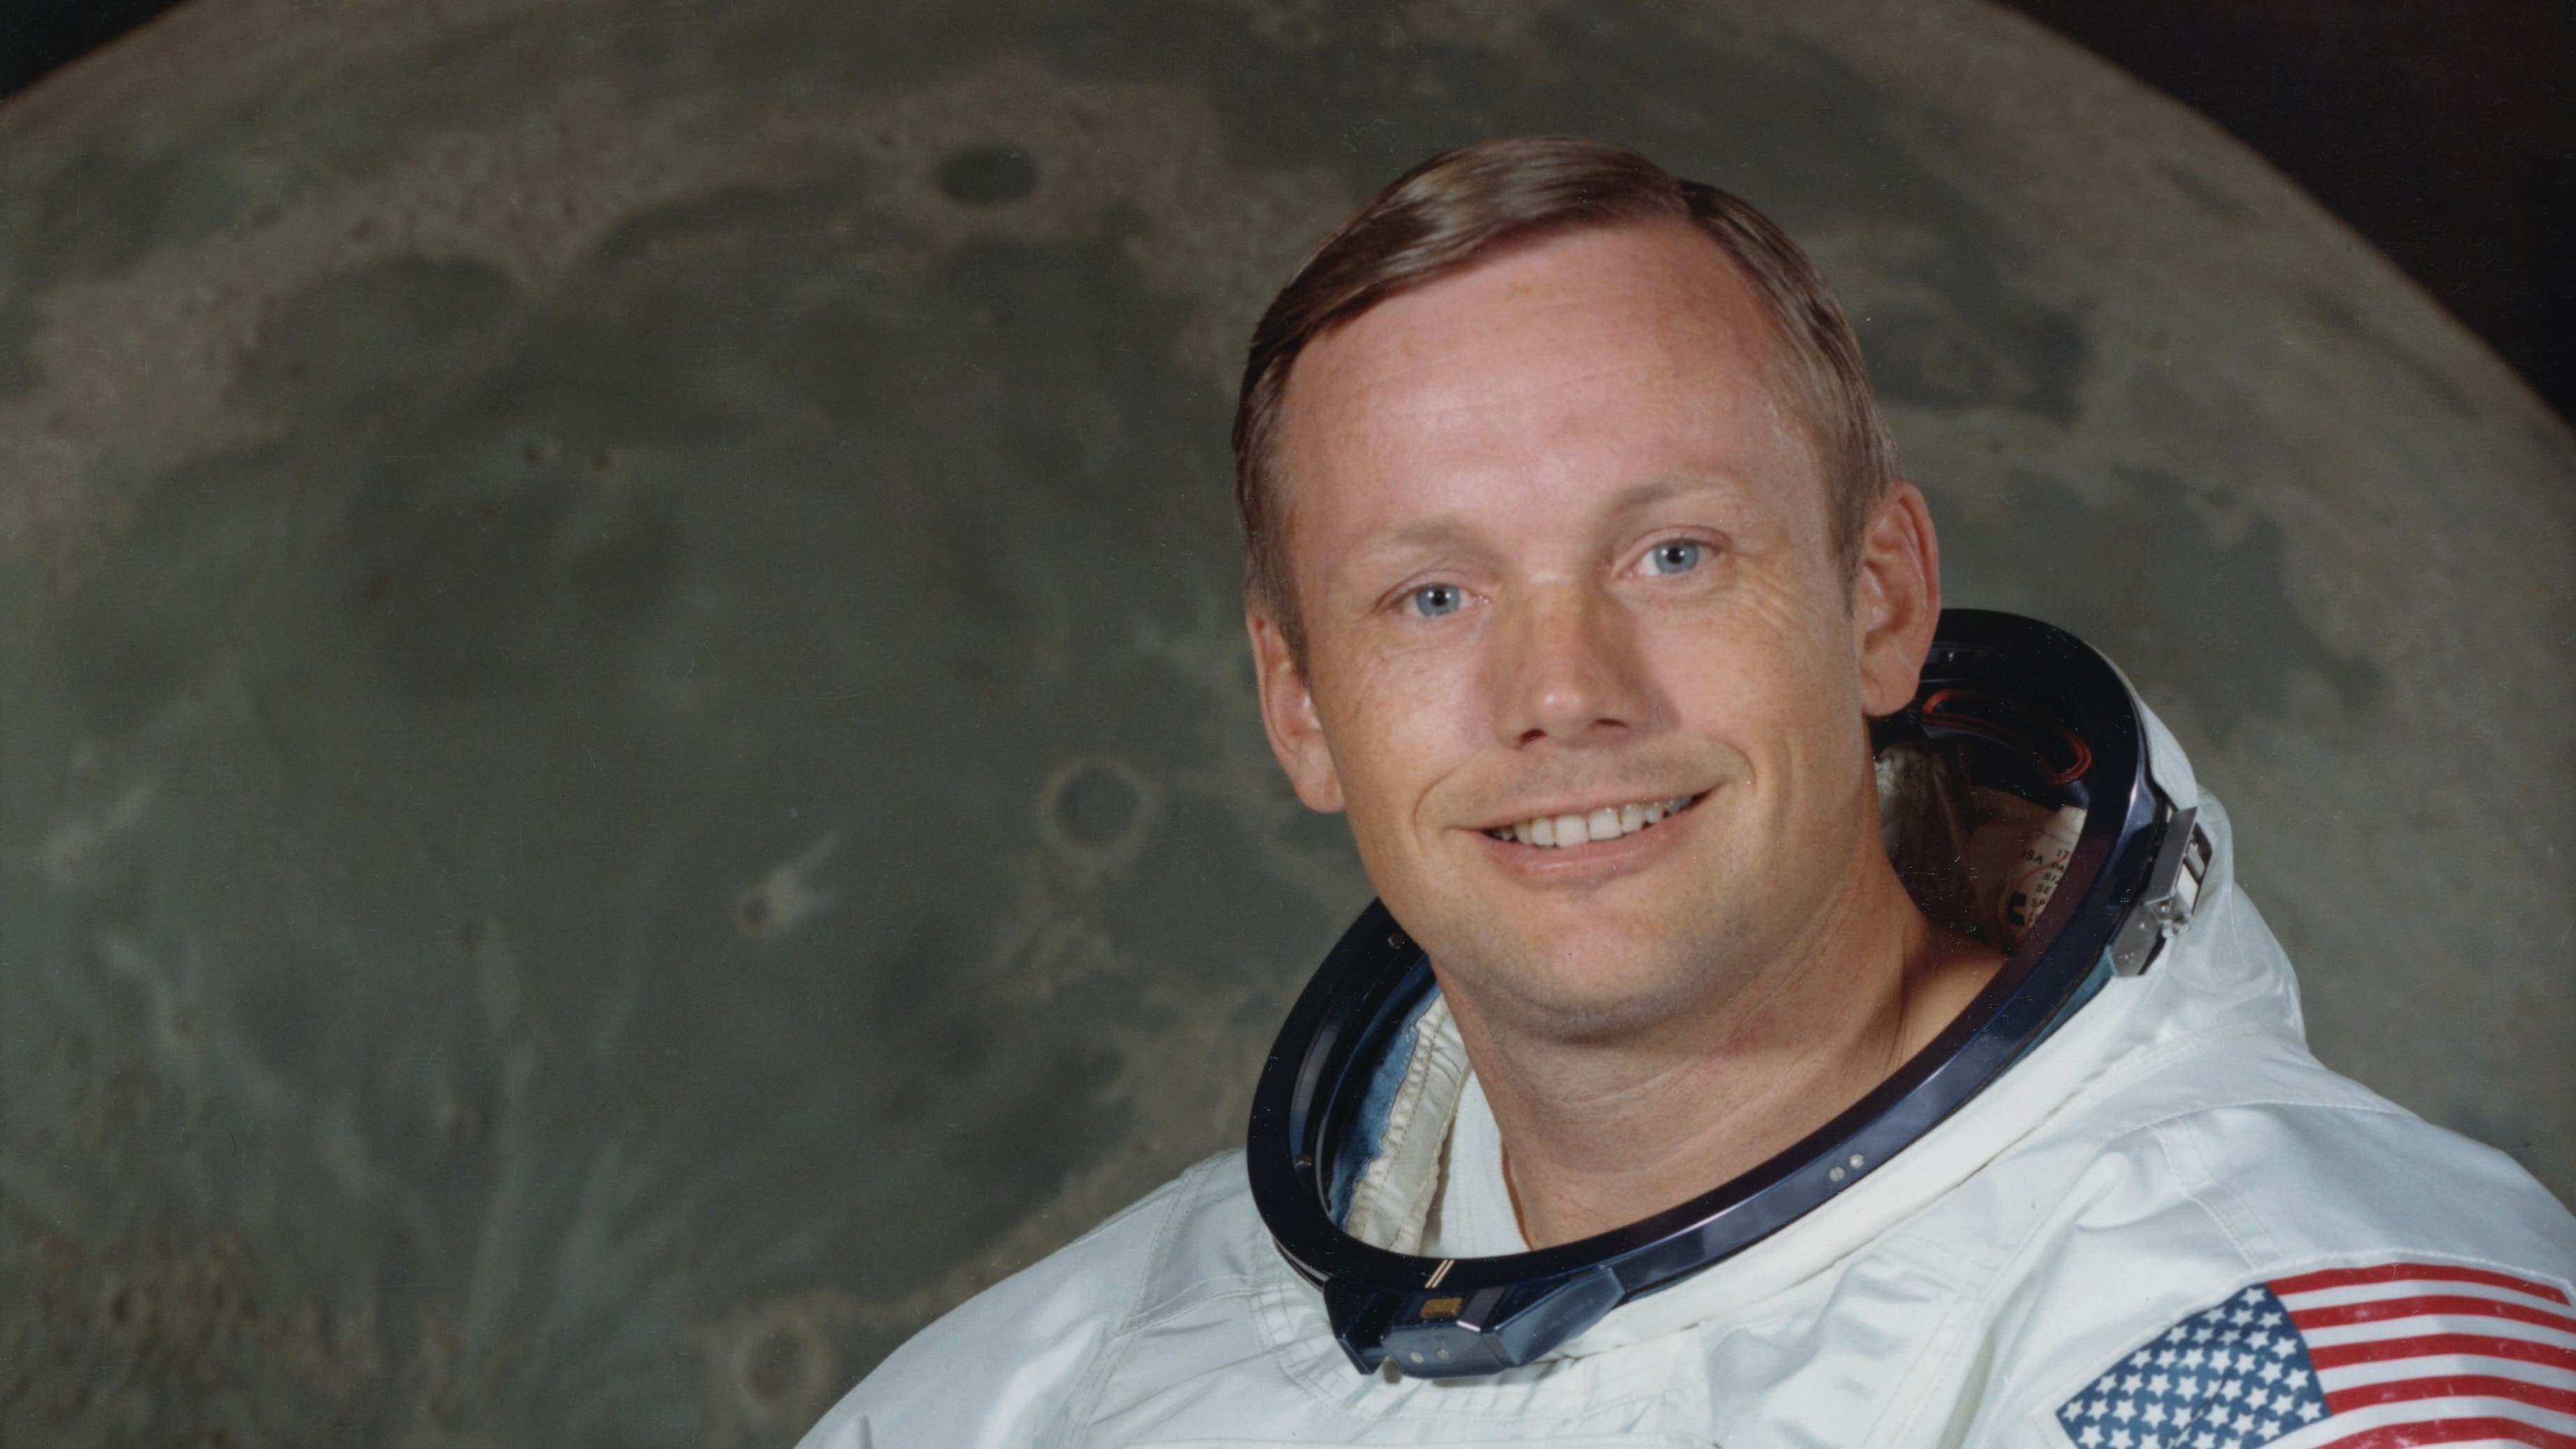 Astronaut Neil Armstrong, Commander of NASA's Apollo 11 lunar landing mission, photographed at the Manned Spacecraft Center (MSC) in Houston, Texas, July 1969.